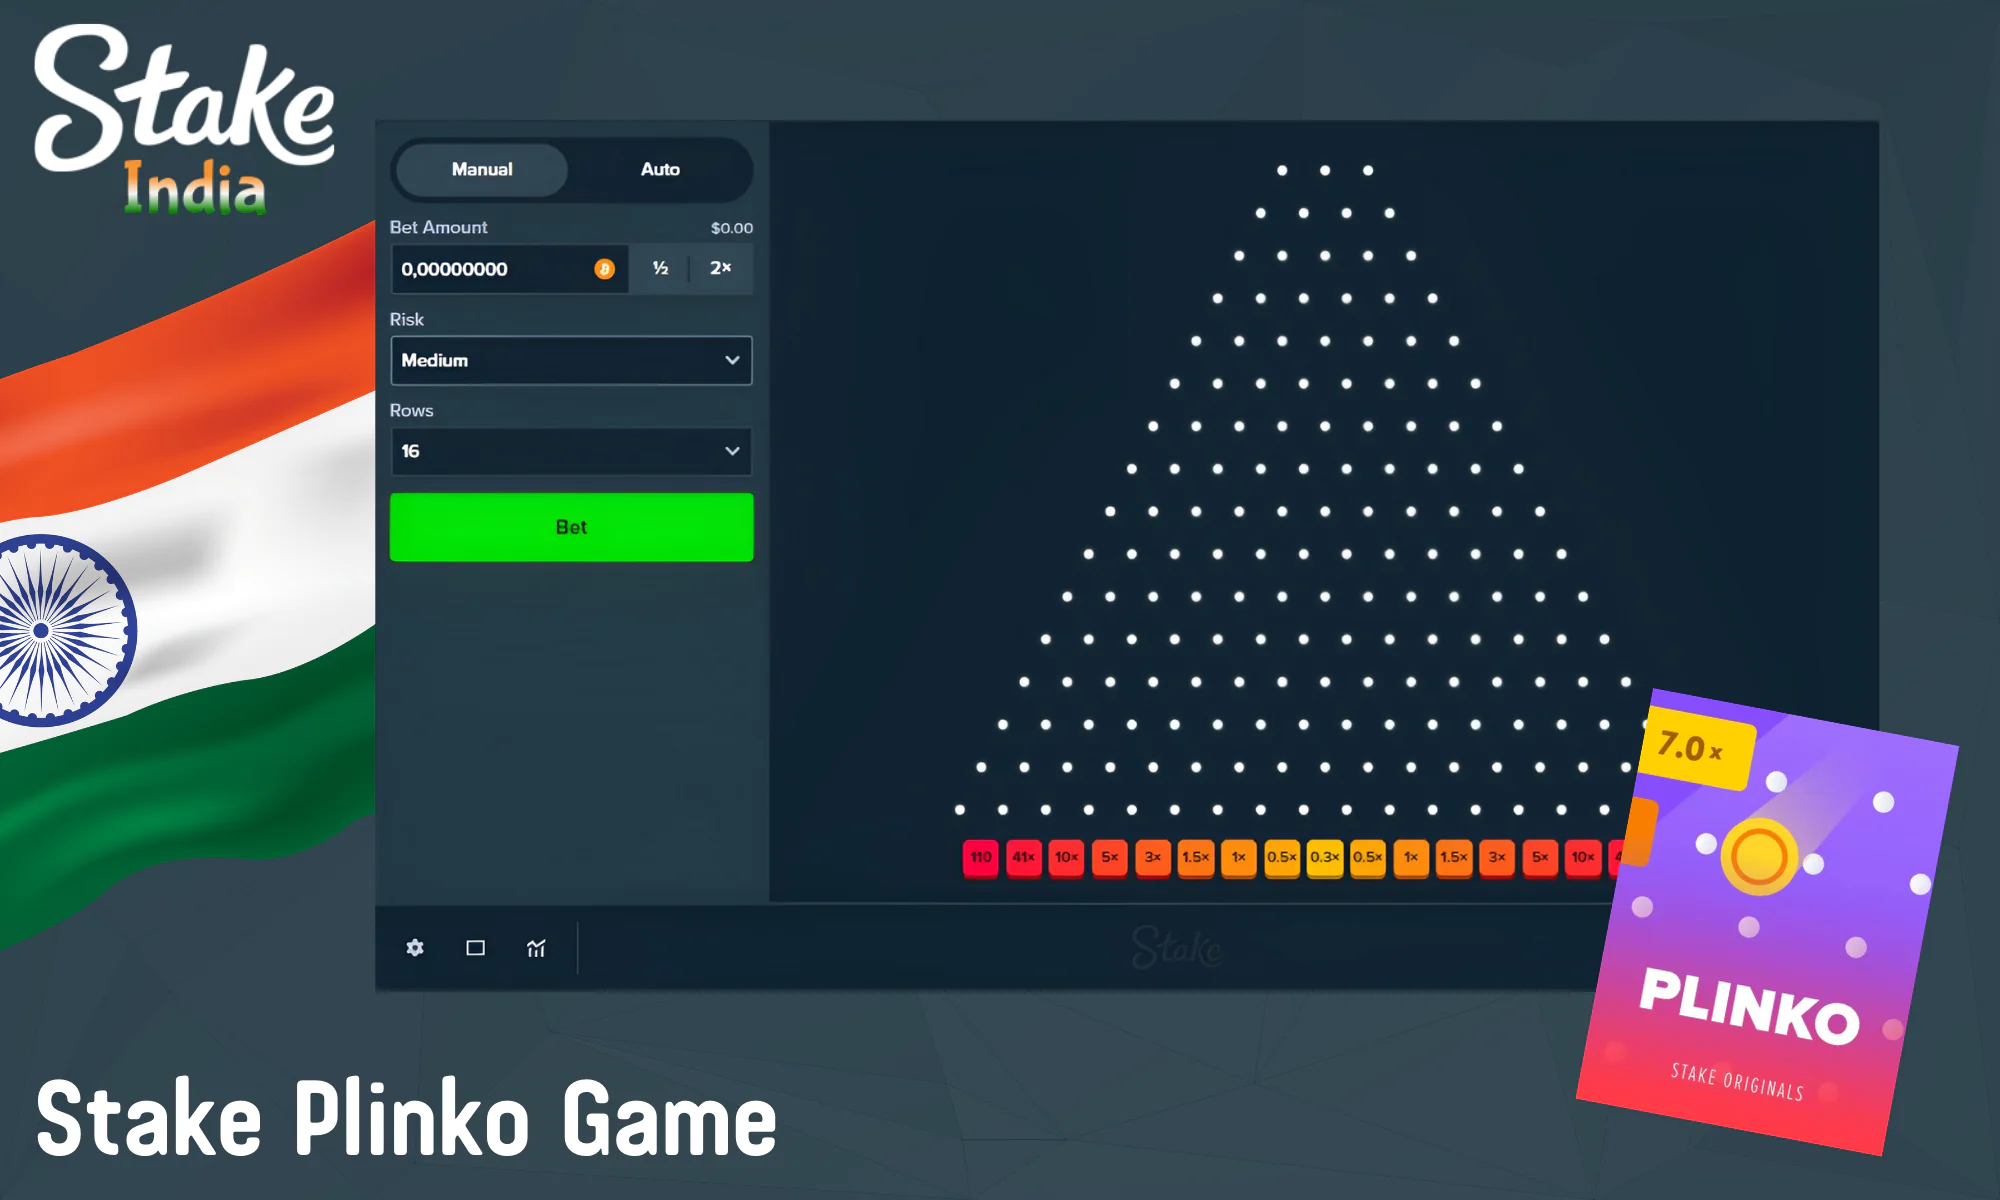 Stake Plinko is a game with the simplest mechanics and the most exciting gameplay